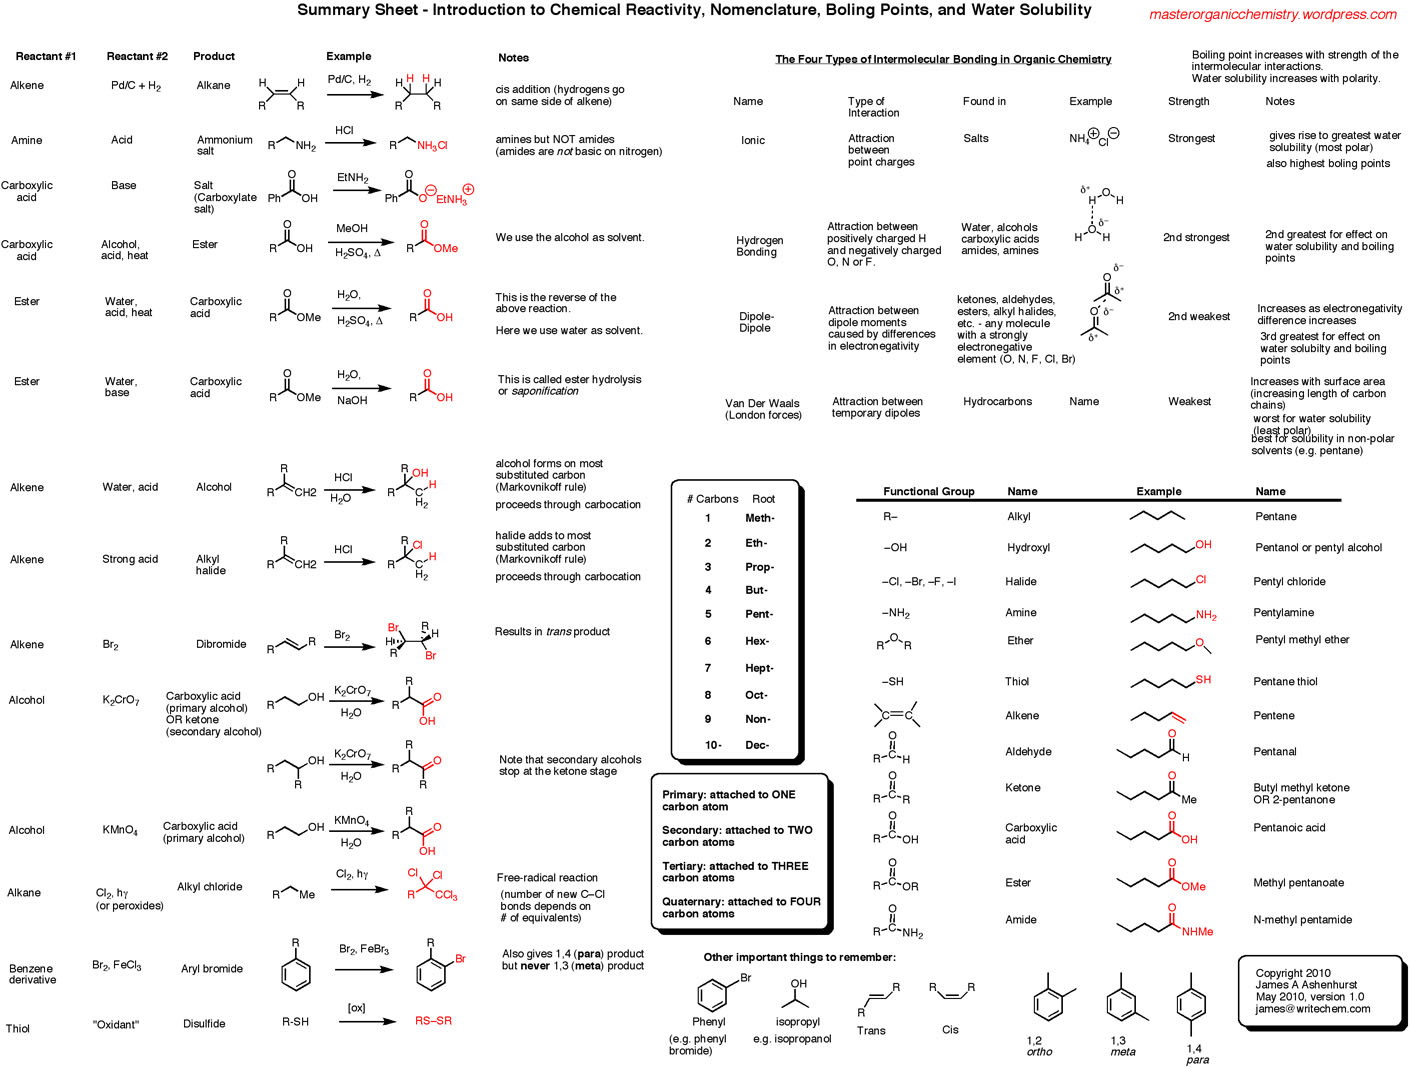 Summary Sheet - Introduction to Reactivity and Nomenclature – Master